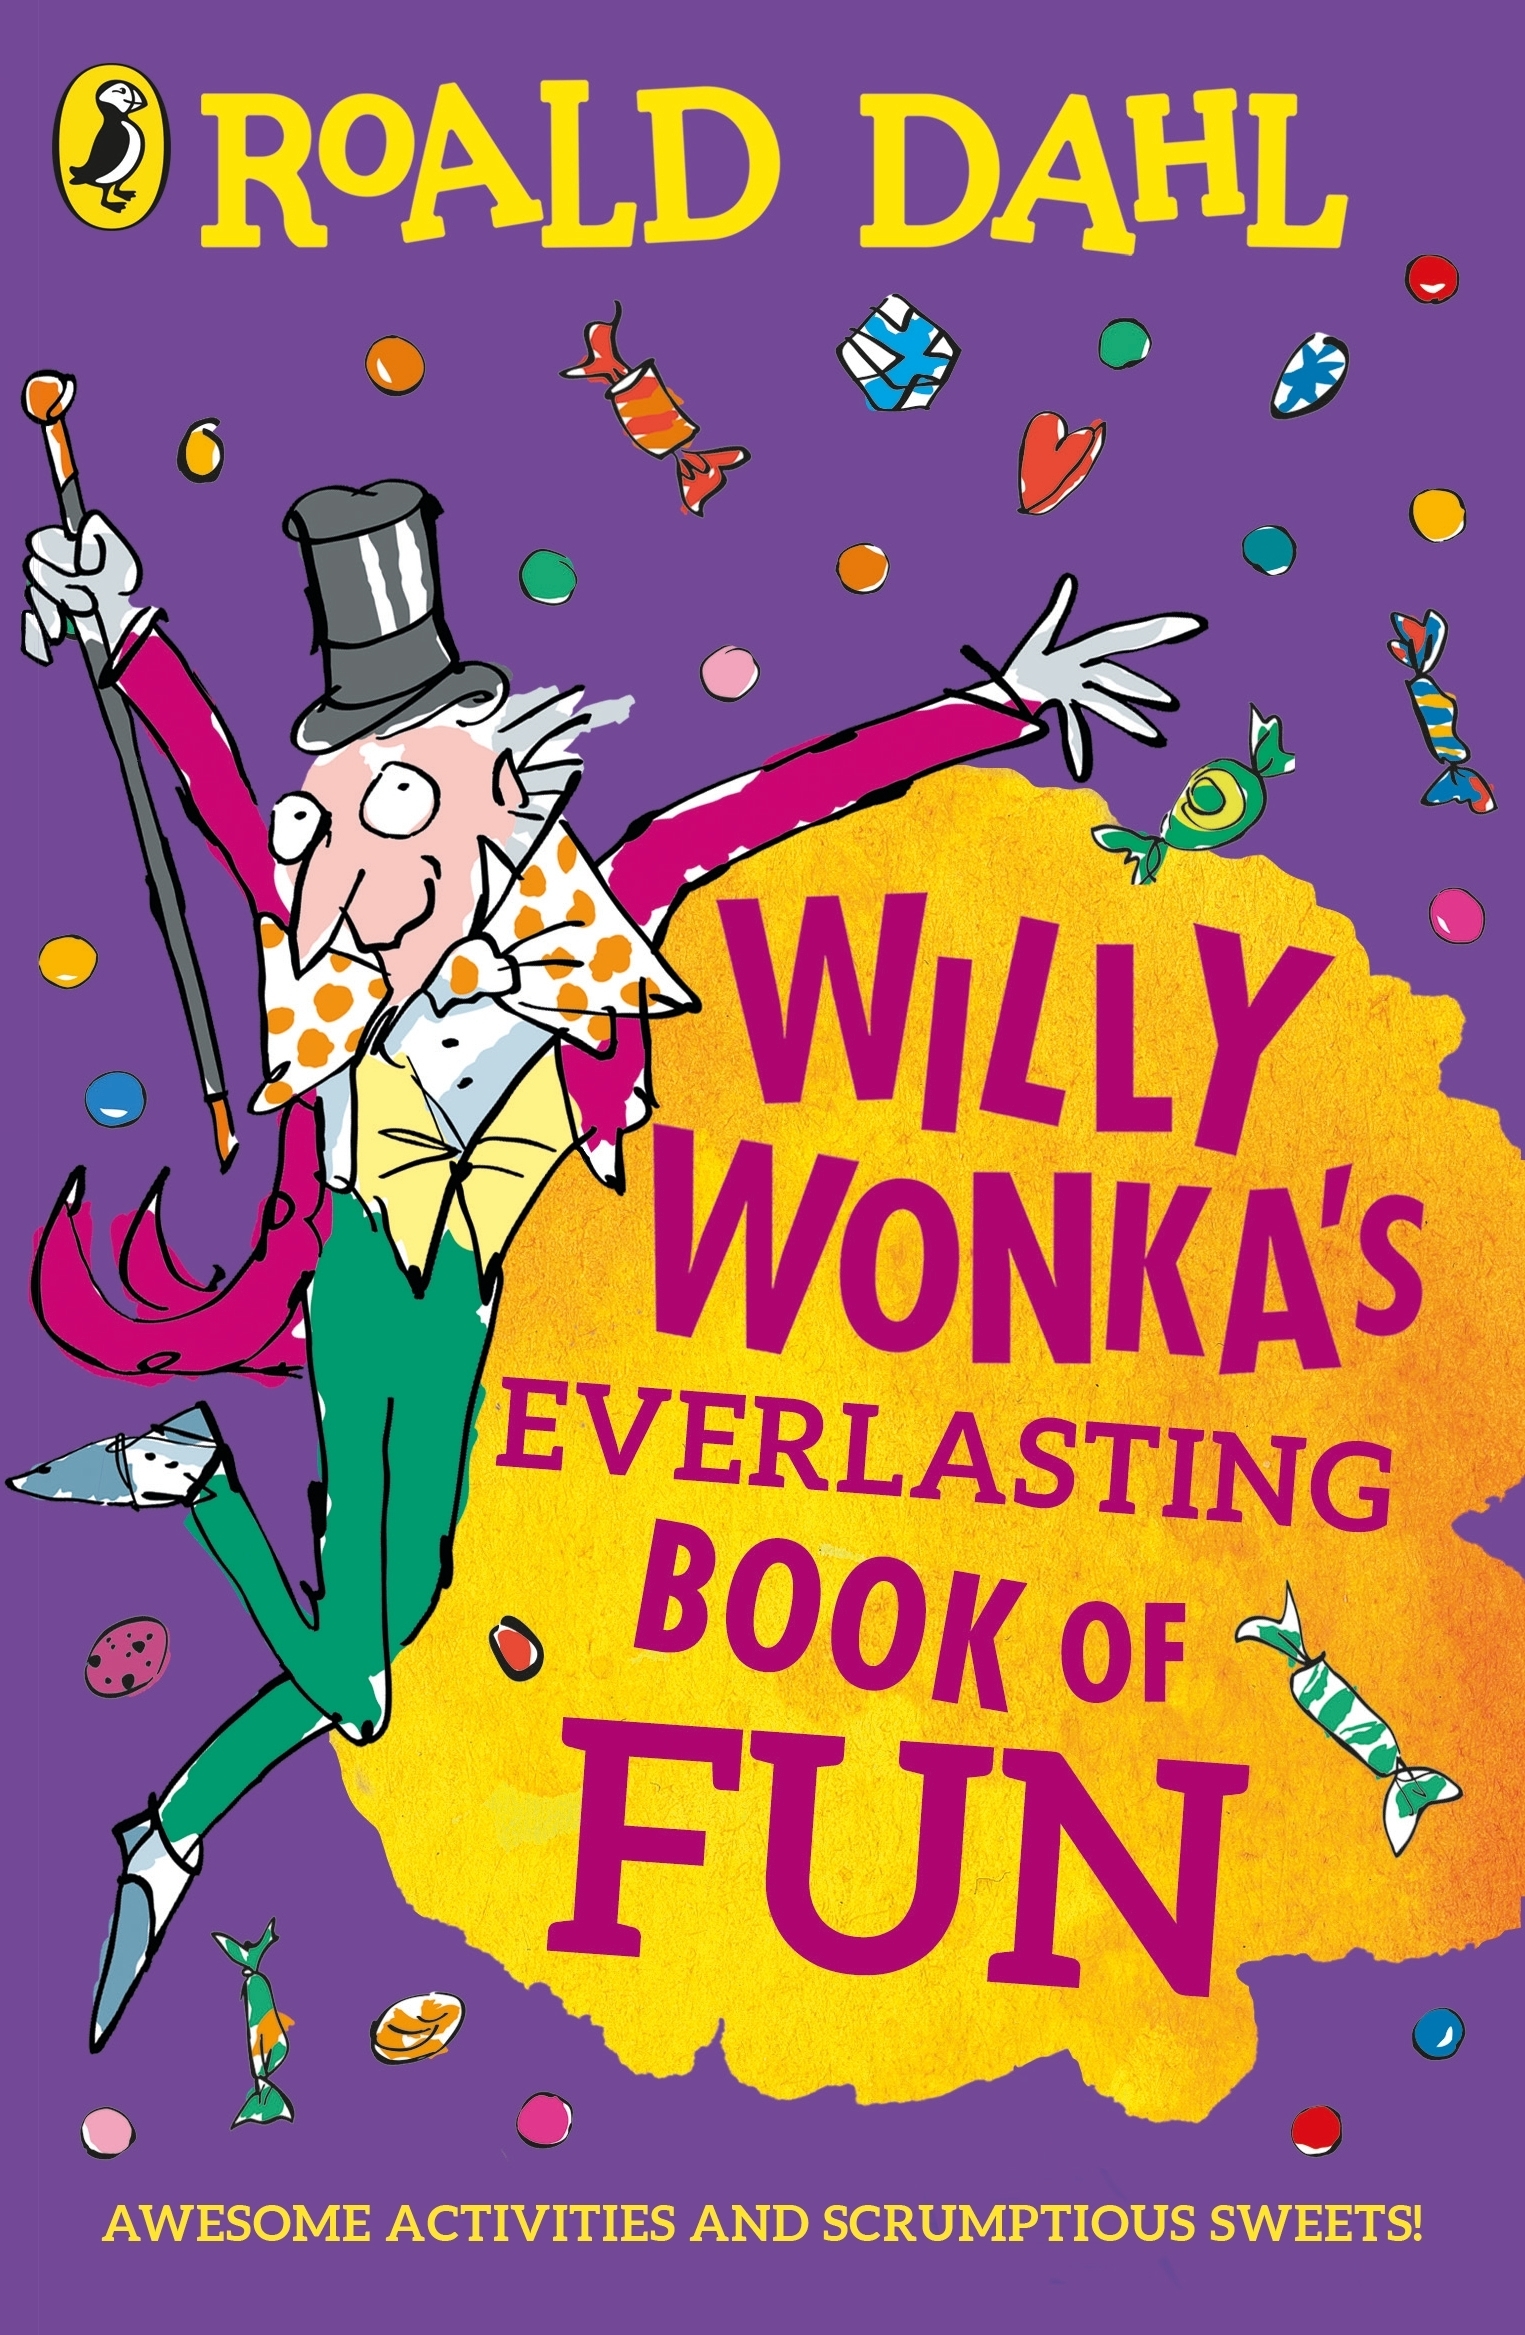 Willy Wonka's Everlasting Book of Fun by Roald Dahl - Penguin